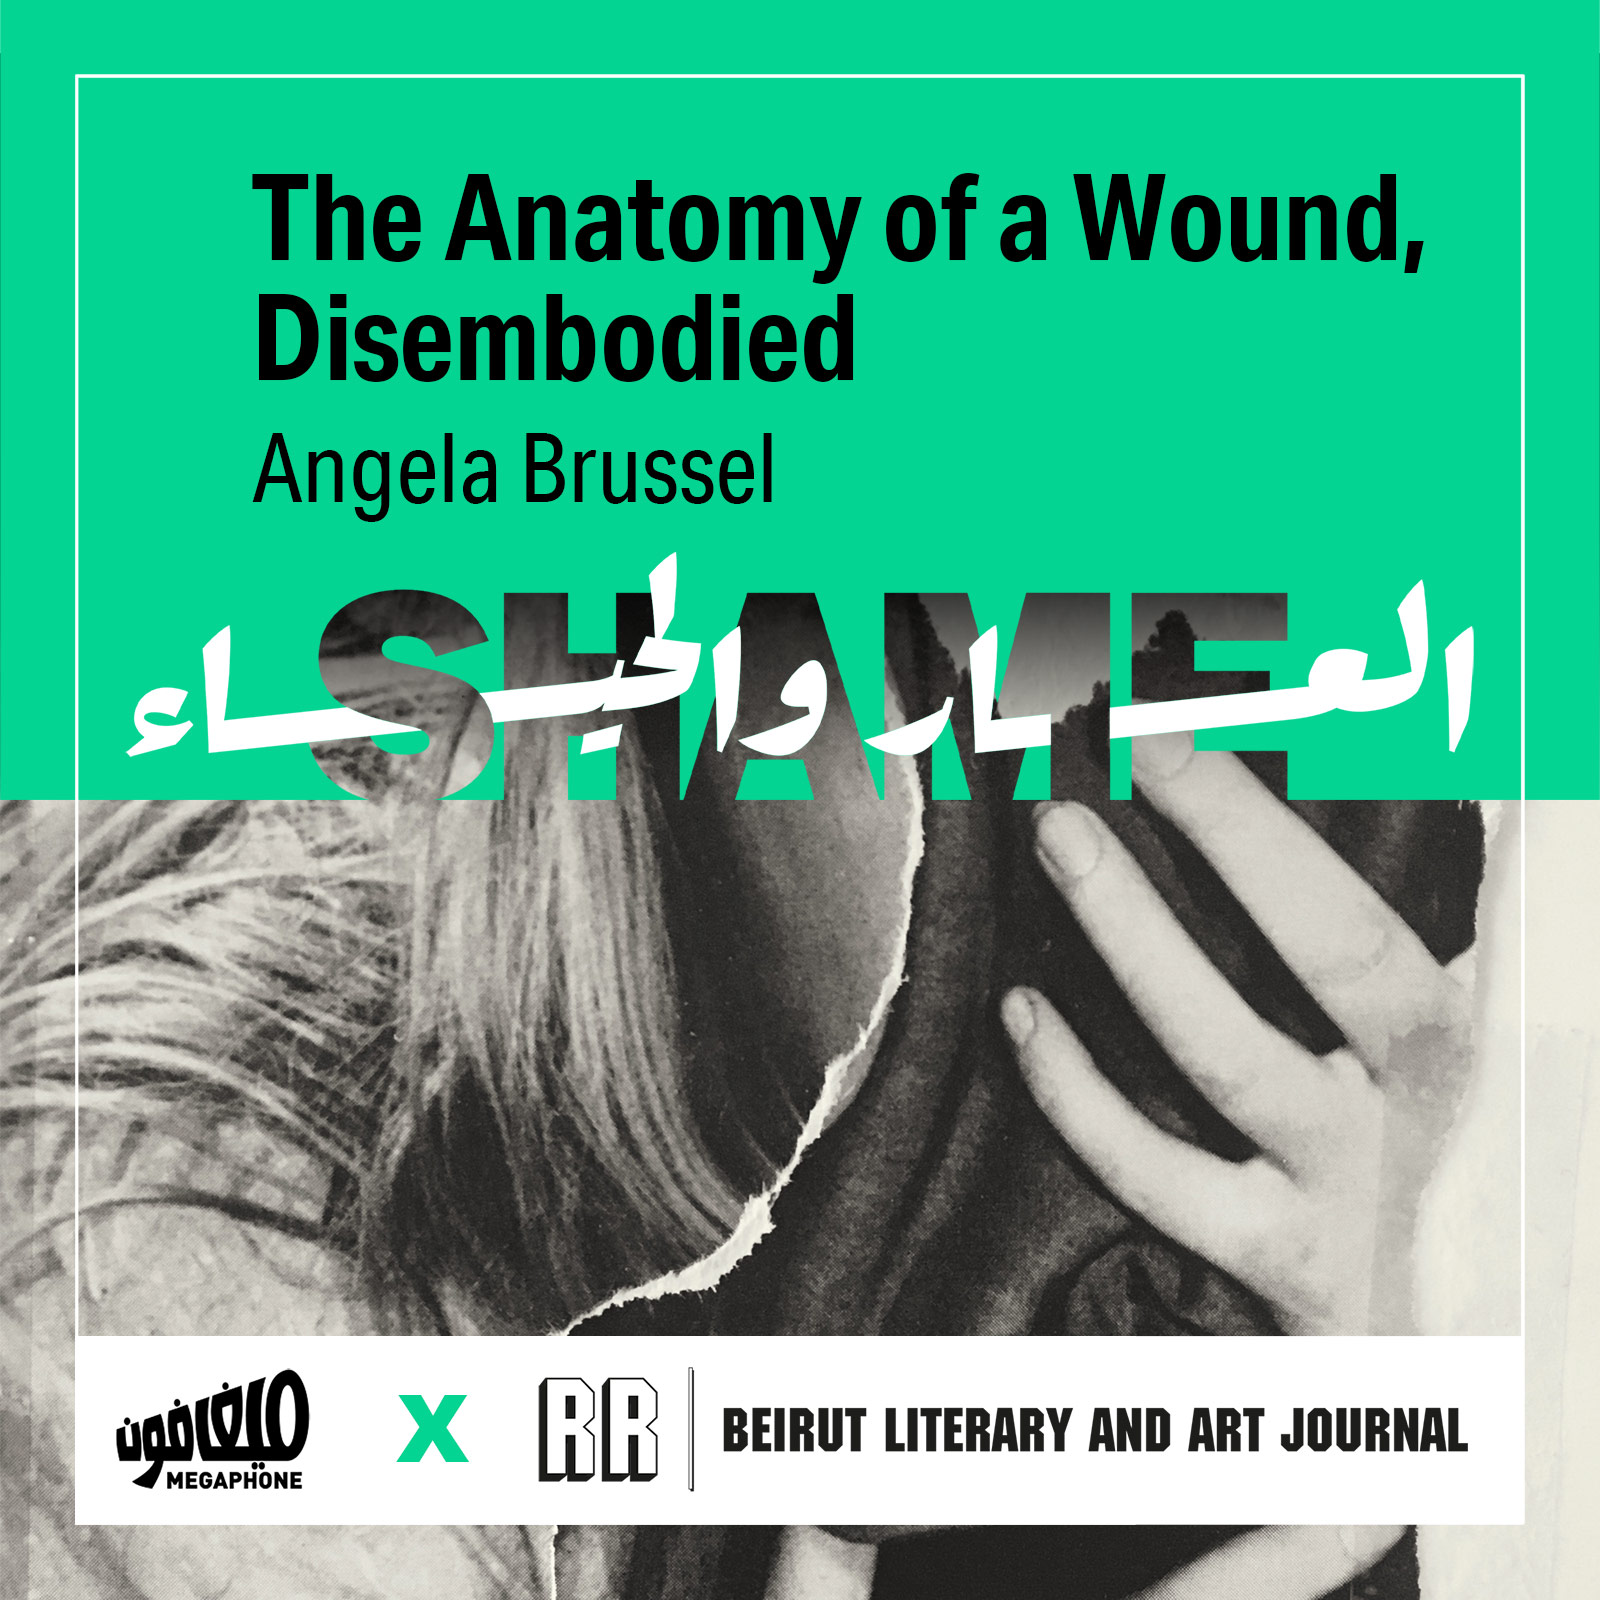 Anatomy of a Wound, Disembodied